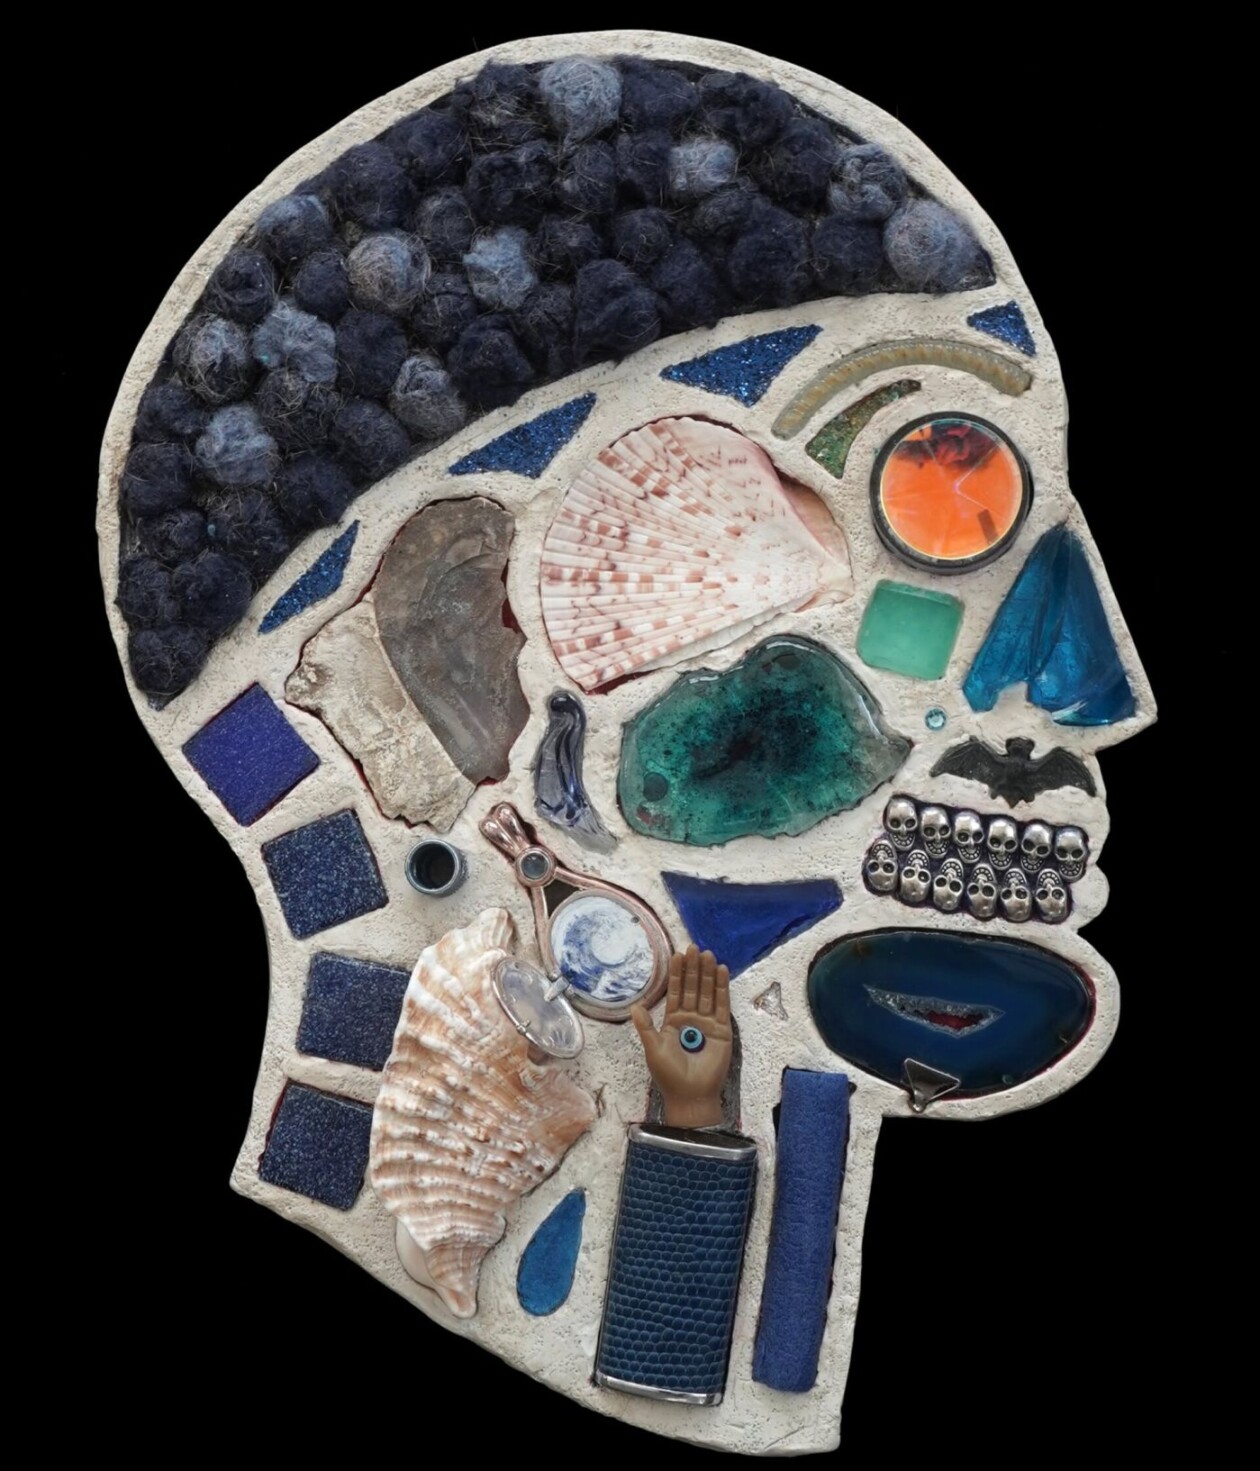 Assemblage Sculptures Of Anatomical Human Head Cross Sections By Edwige Massart And Xavier Wynn (11)